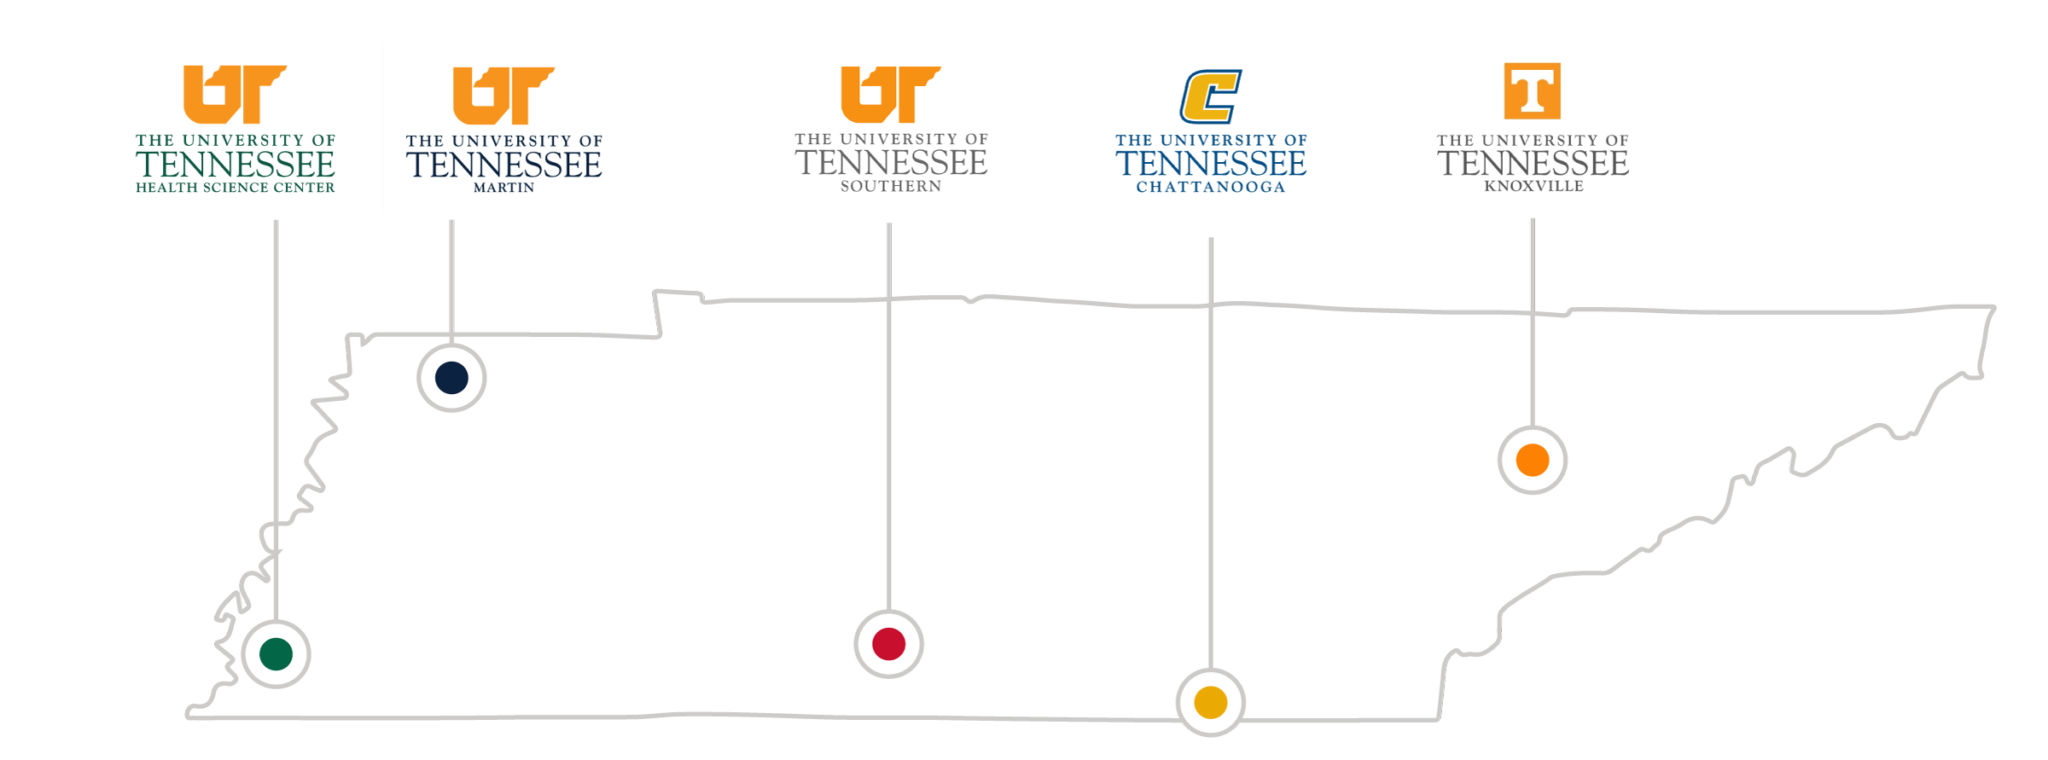 campus-guide-the-university-of-tennessee-system